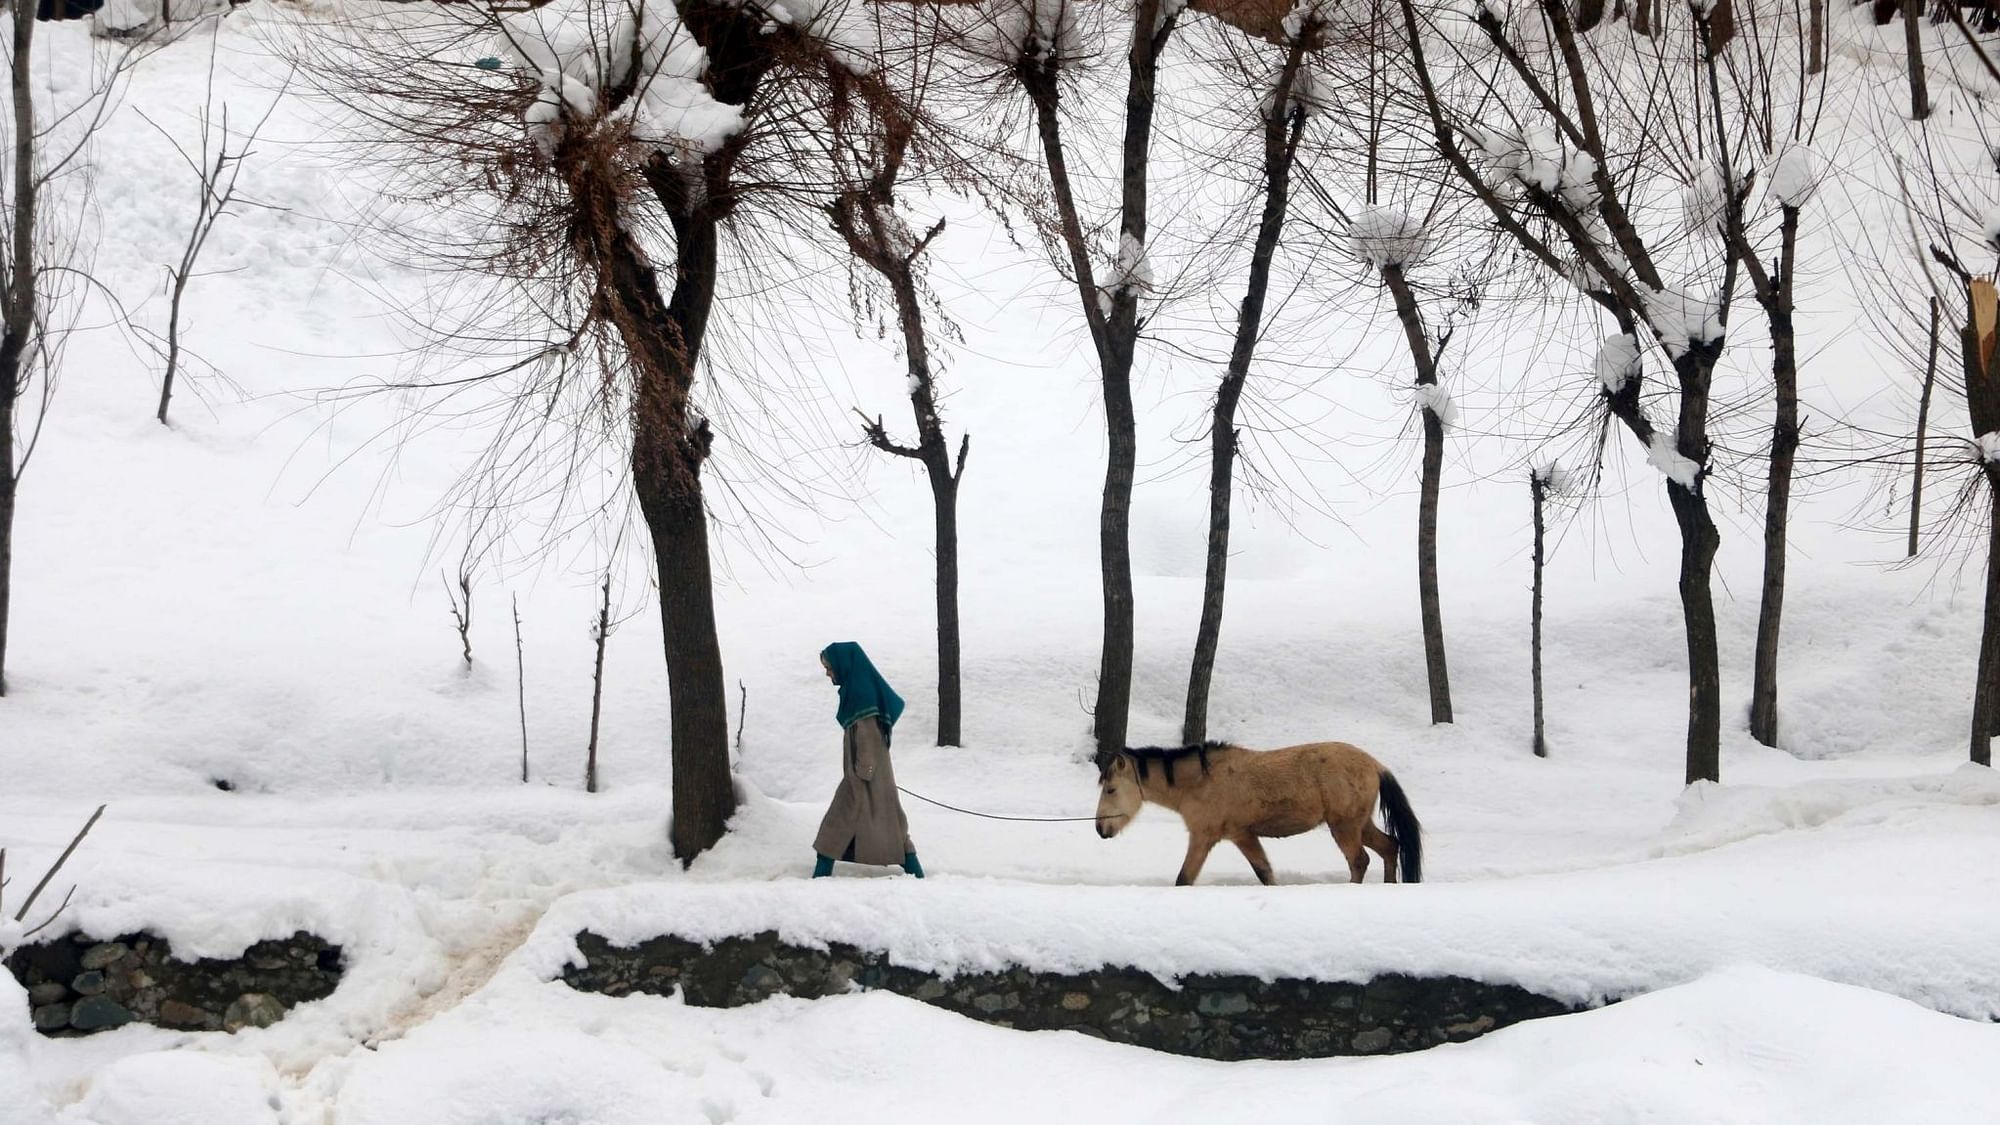 A girl seen walking her donkey in the snow covered patch.